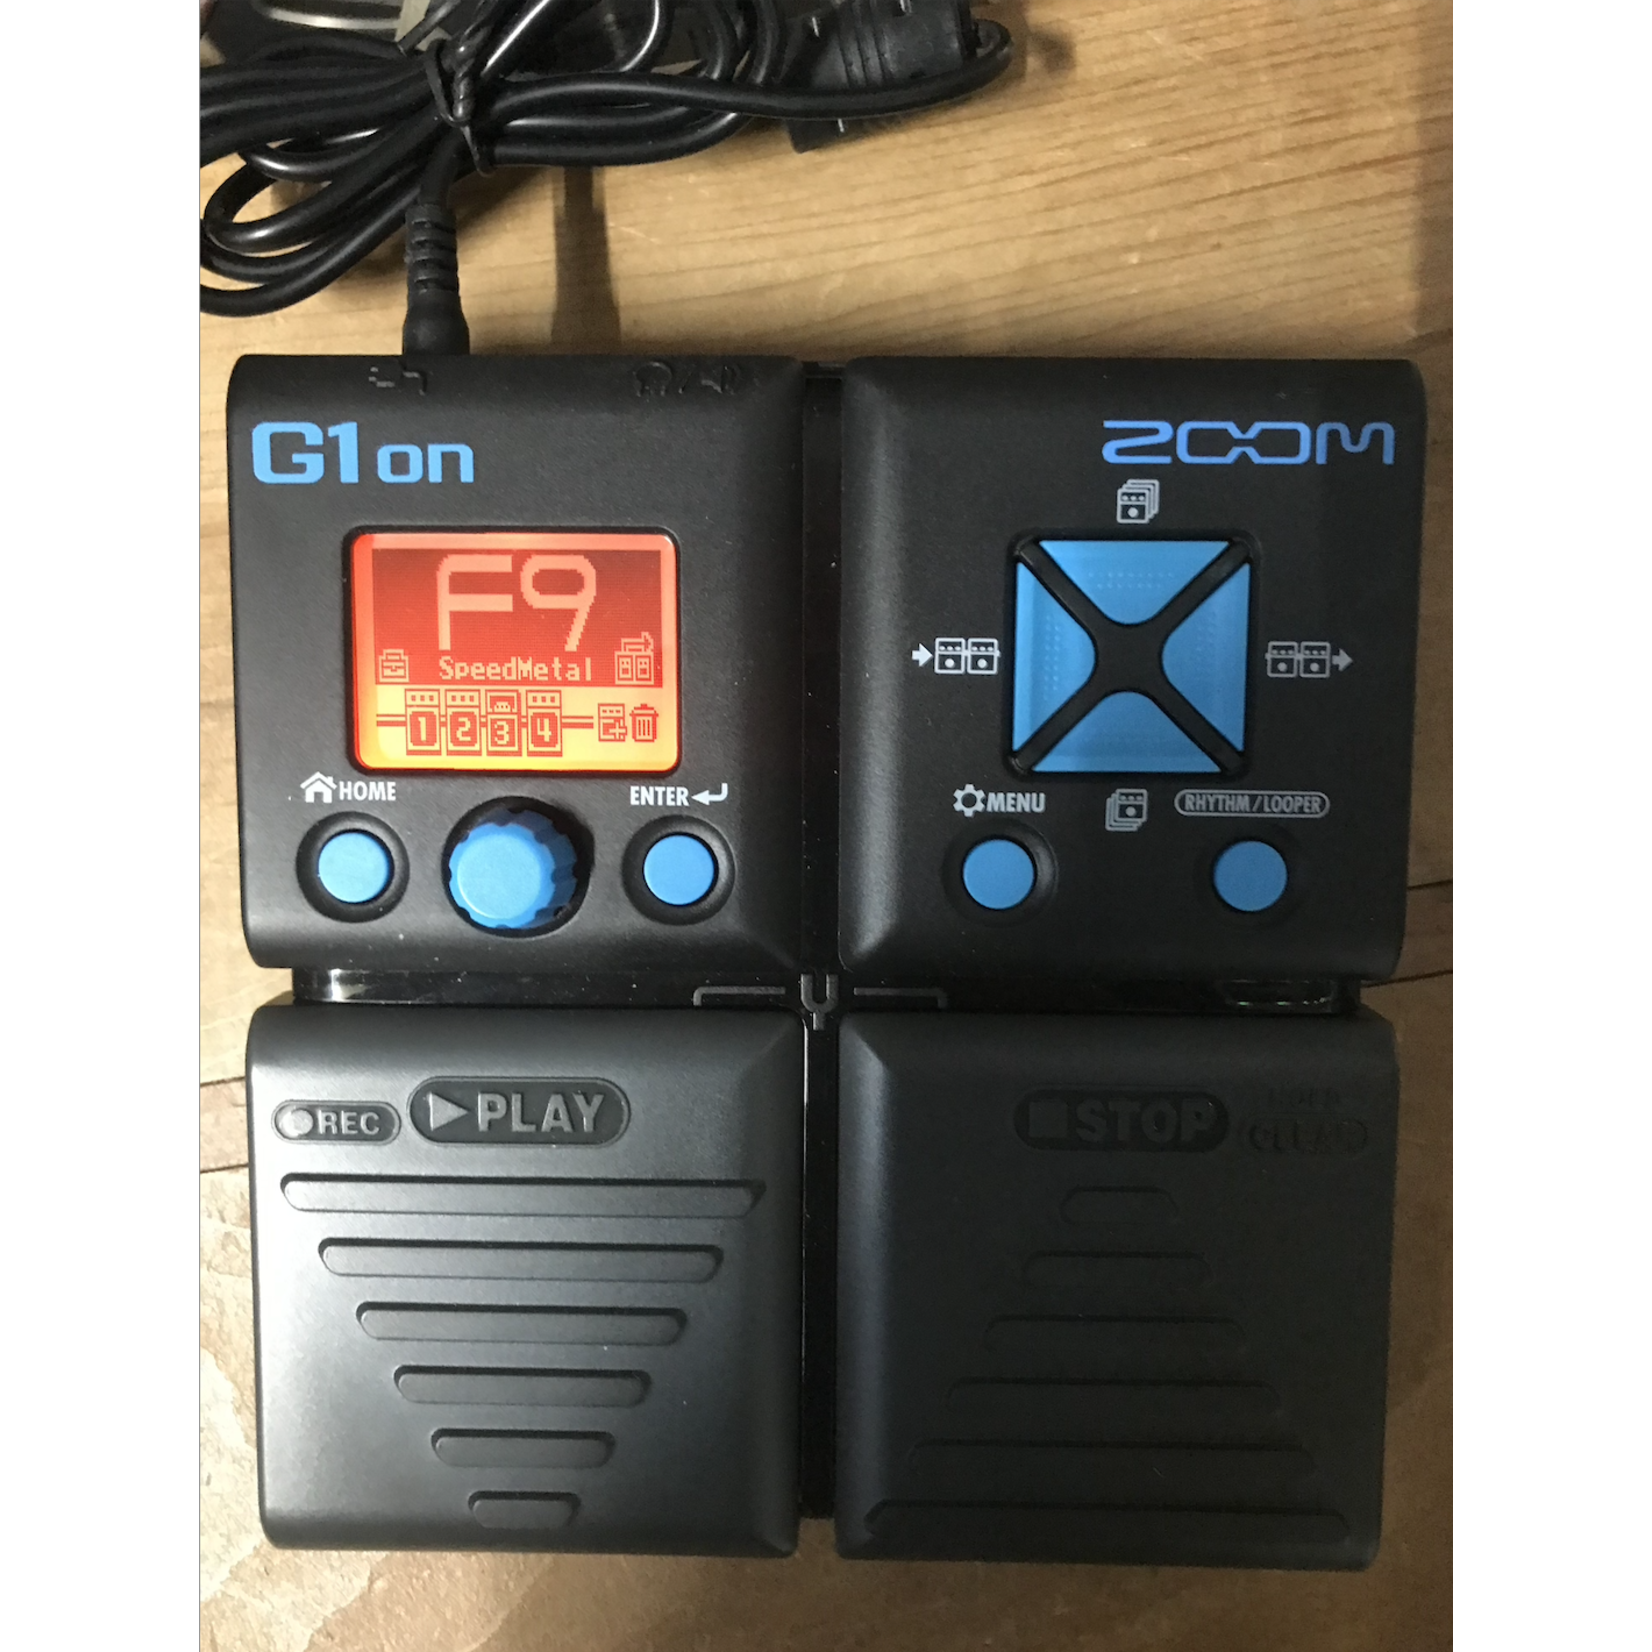 USED G1on - Effects Guitar Pedal and sampler loop - Guitar Gear Garage